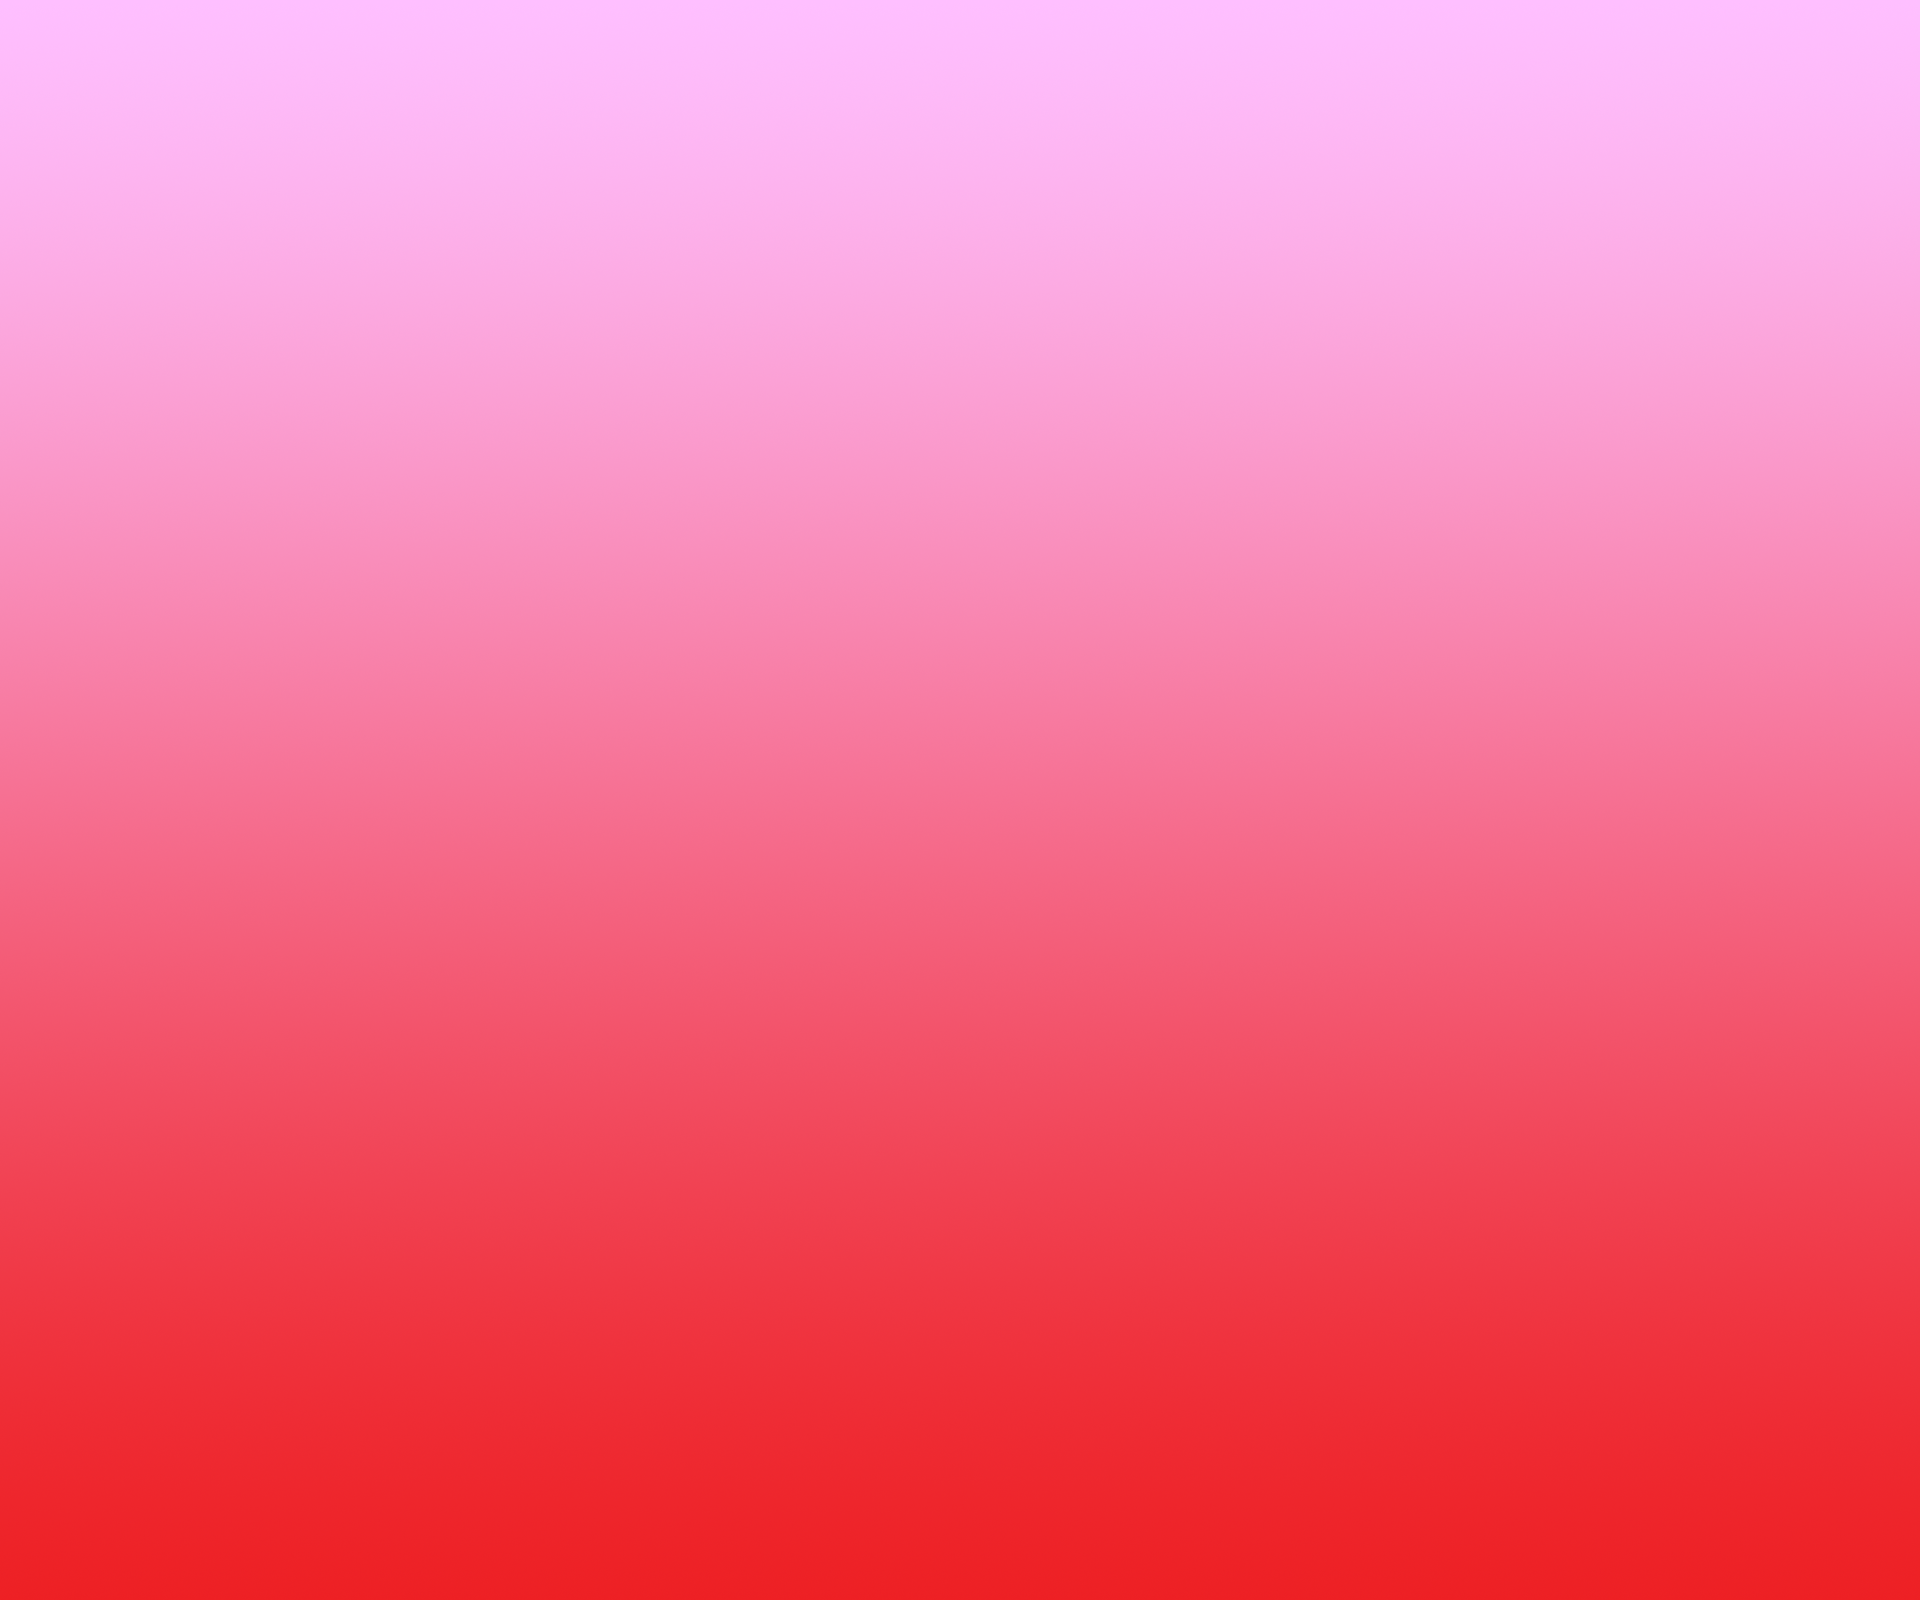 Pink-Red Gradient by Halaxega on DeviantArt